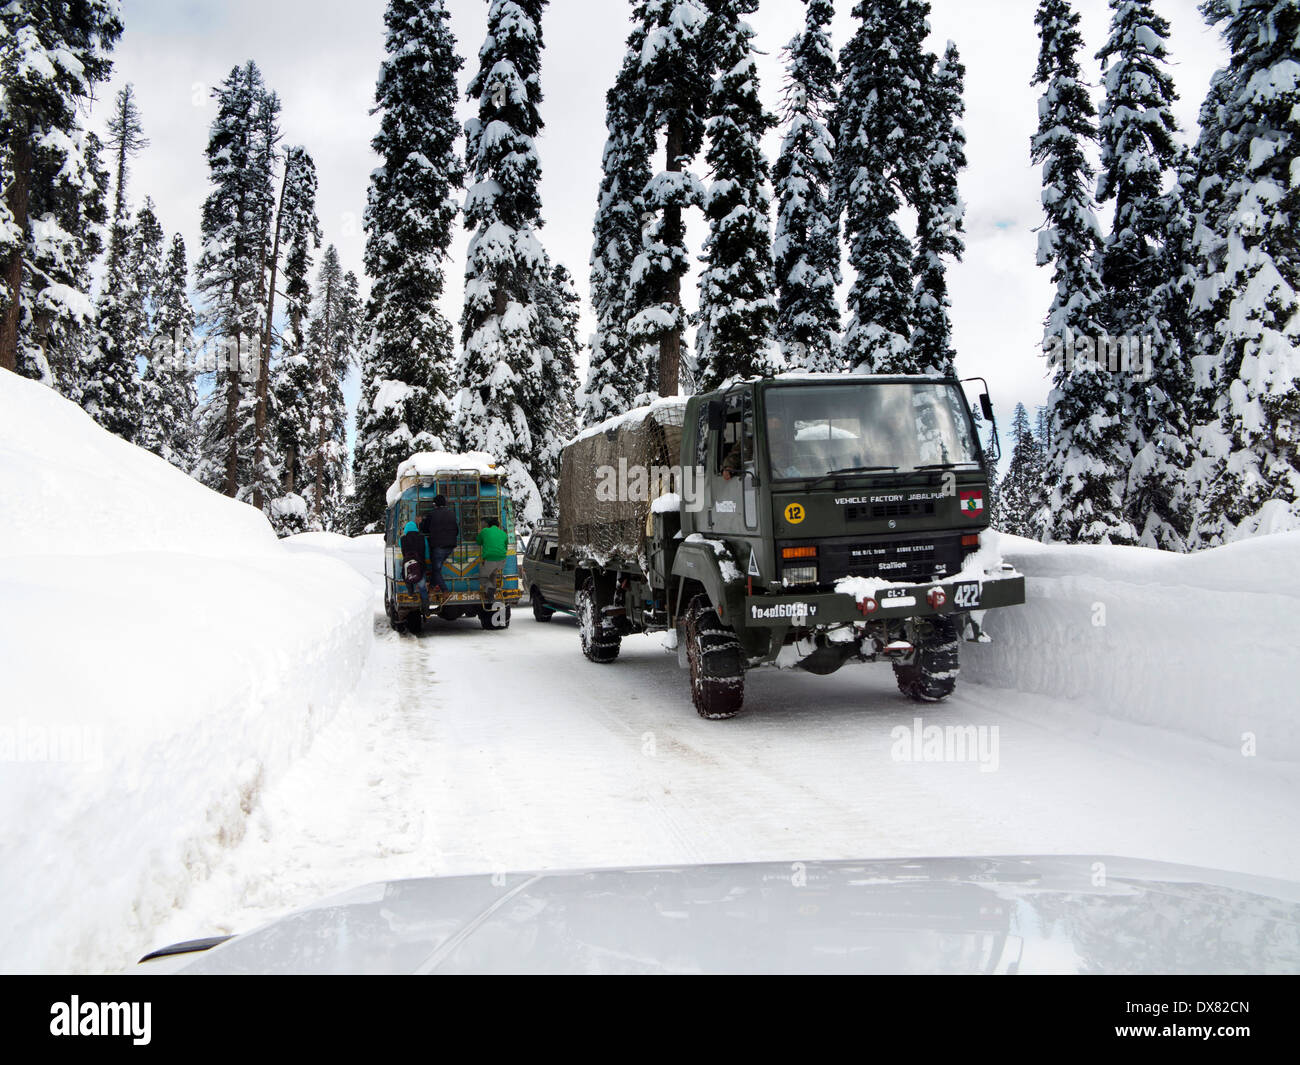 india-kashmir-gulmarg-army-truck-with-snow-chains-driving-on-snow-DX82CN.jpg